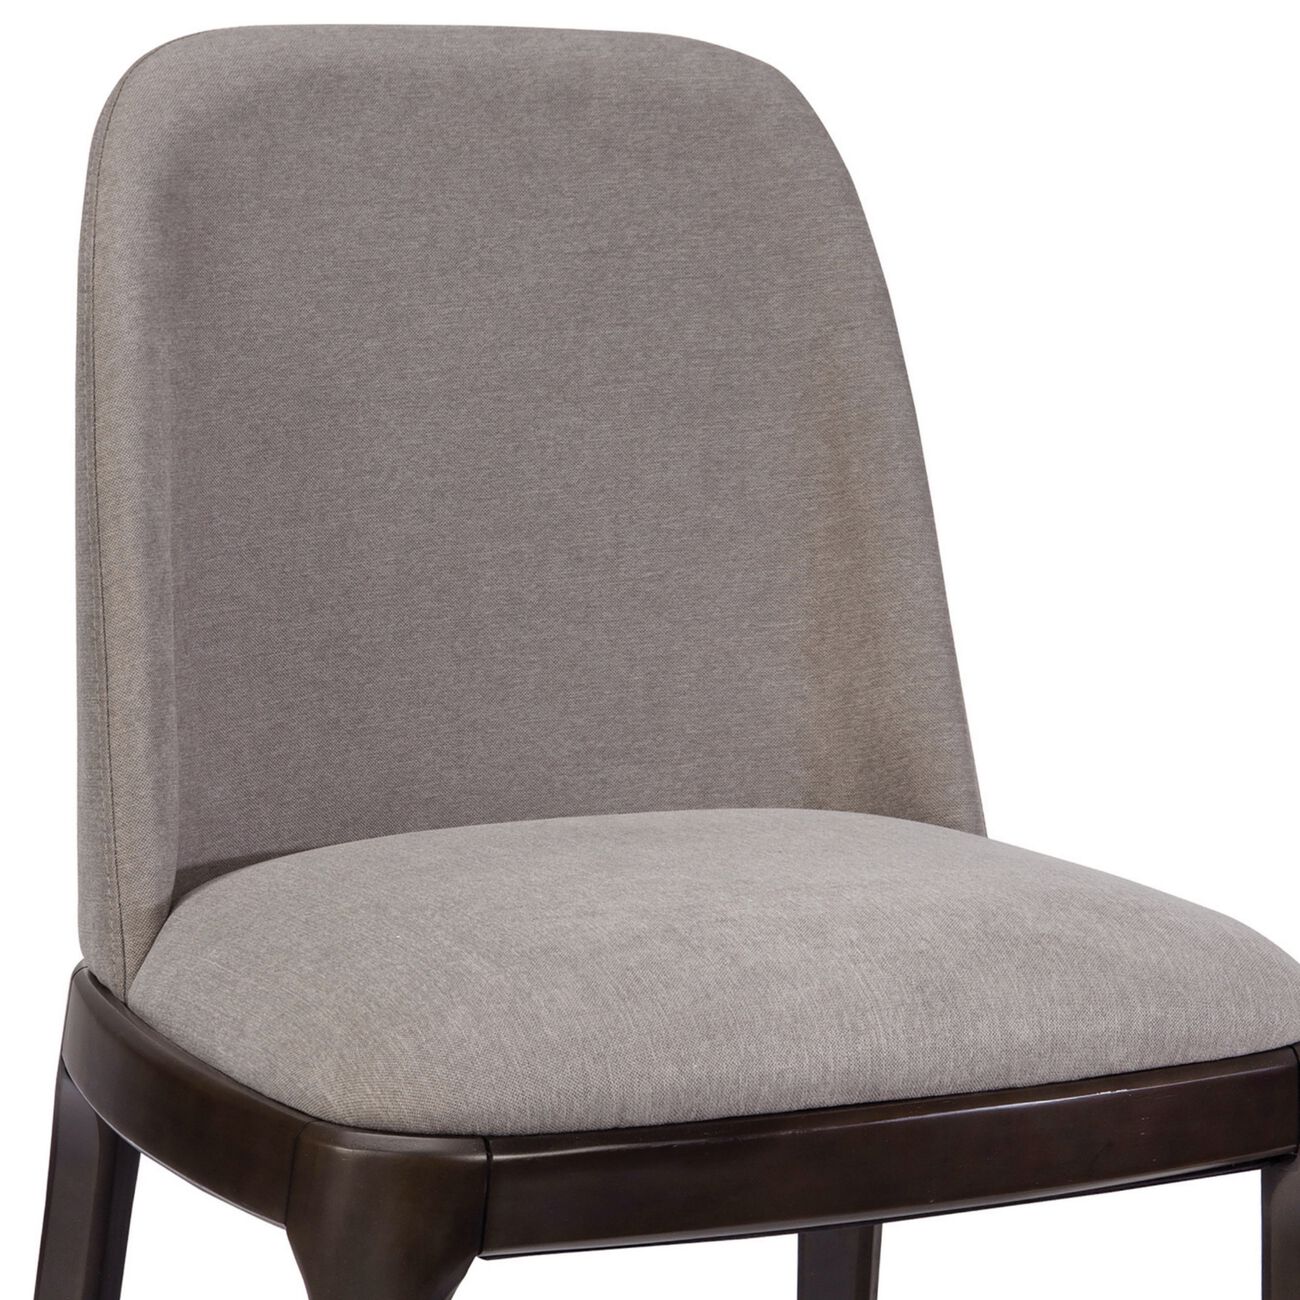 Transitional Fabric Dining Chair with Curved Back, Set of 2, gray